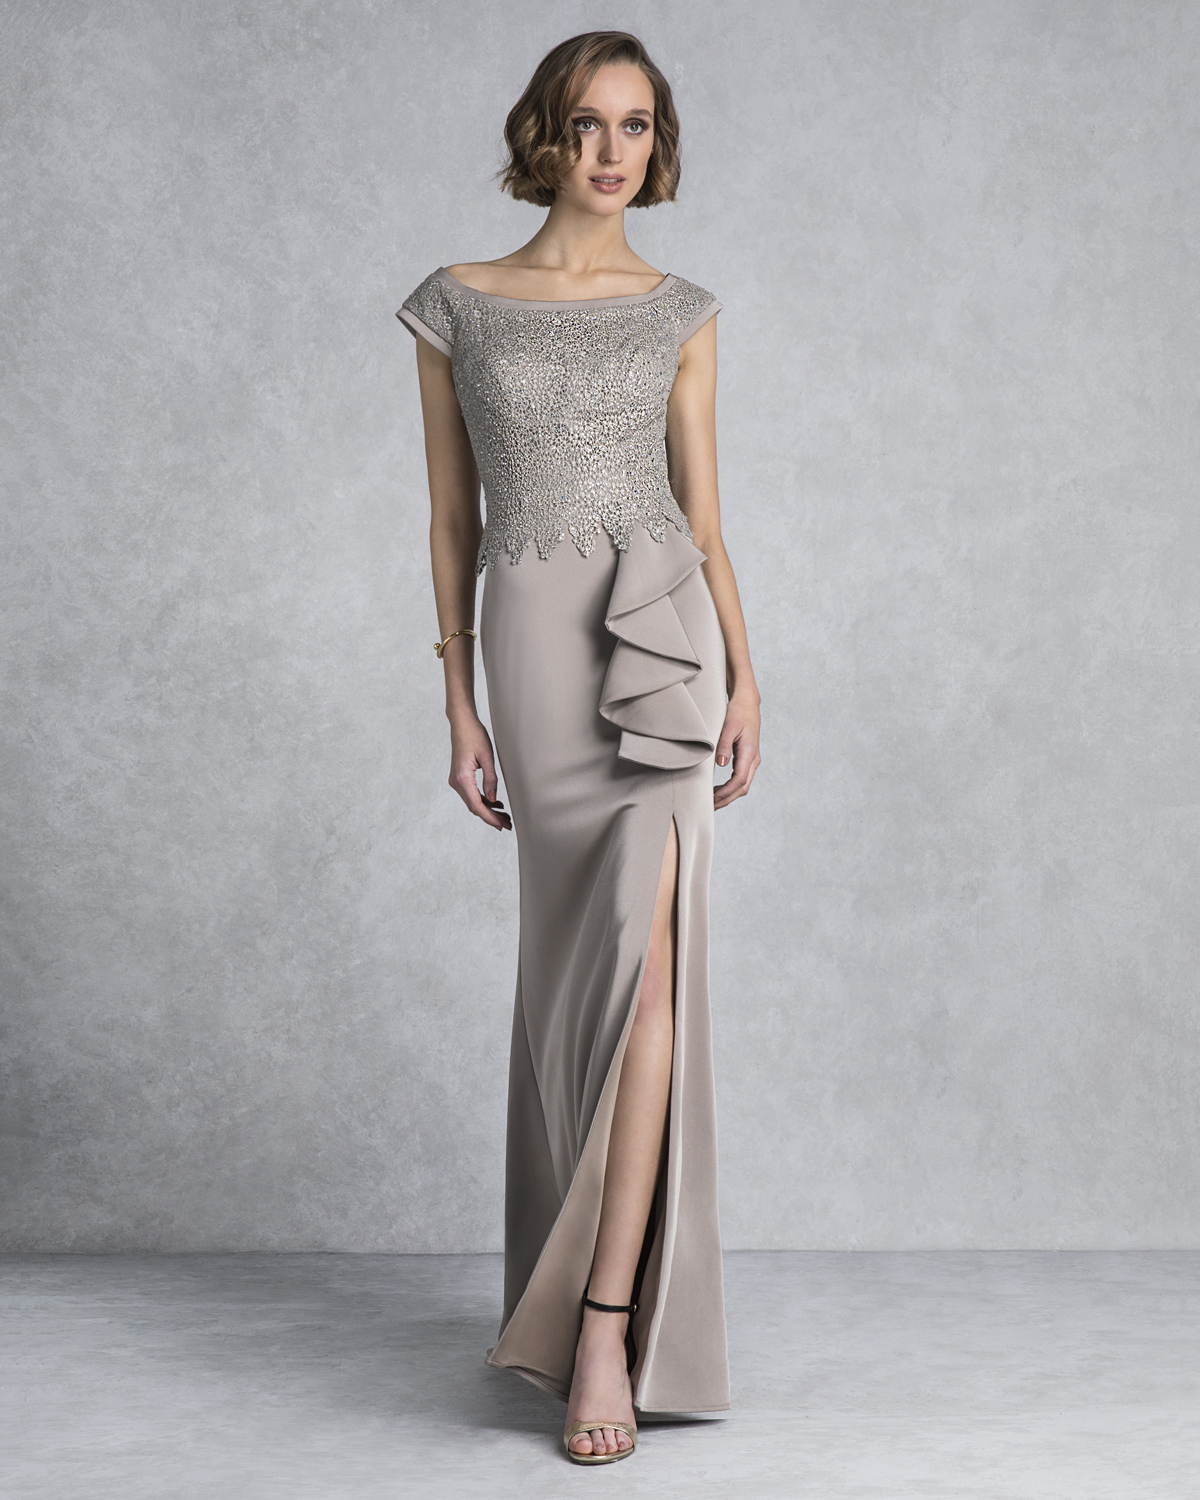 Classic Dresses / Long evening dress with lace and beading for the mother of the bride